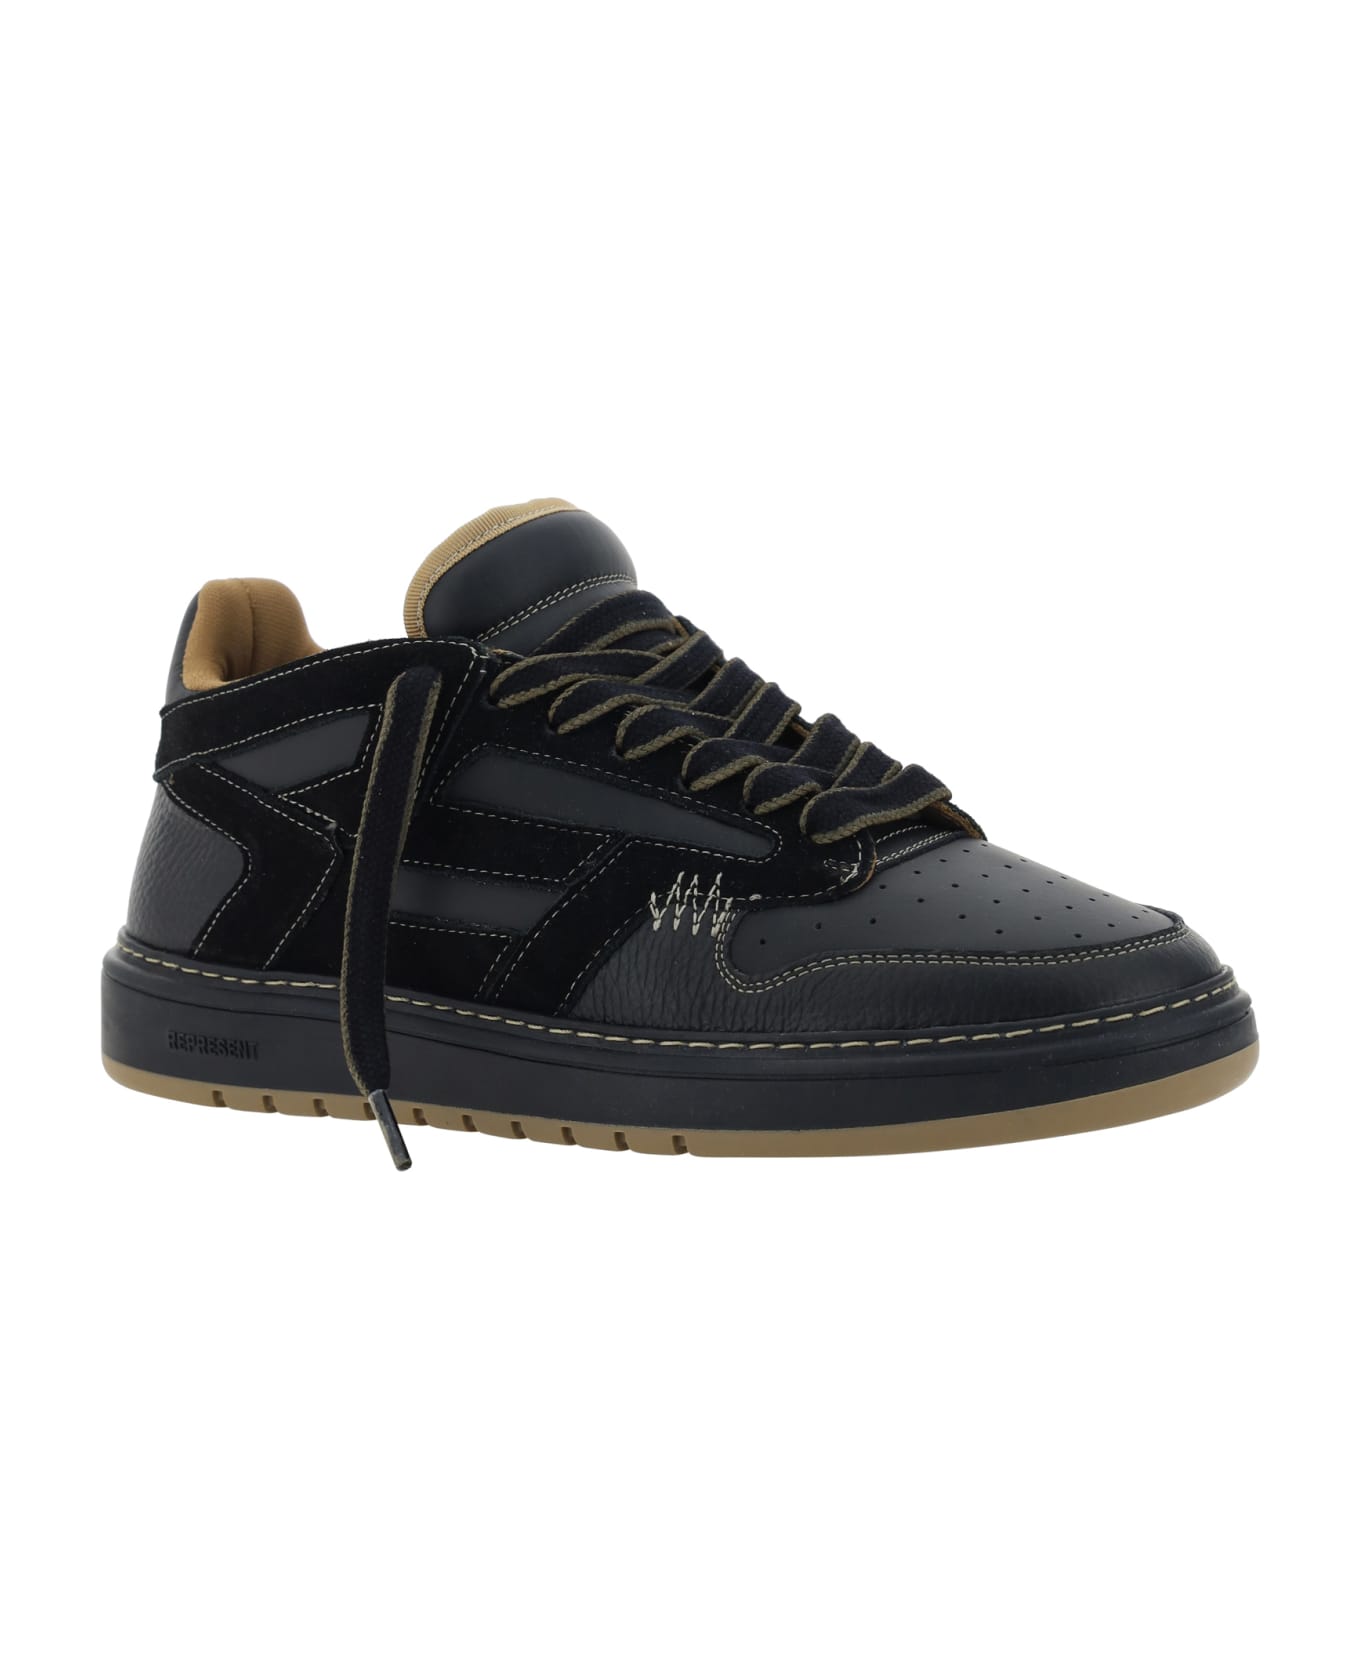 REPRESENT Reptor Sneakers - Black/washed Taupe スニーカー